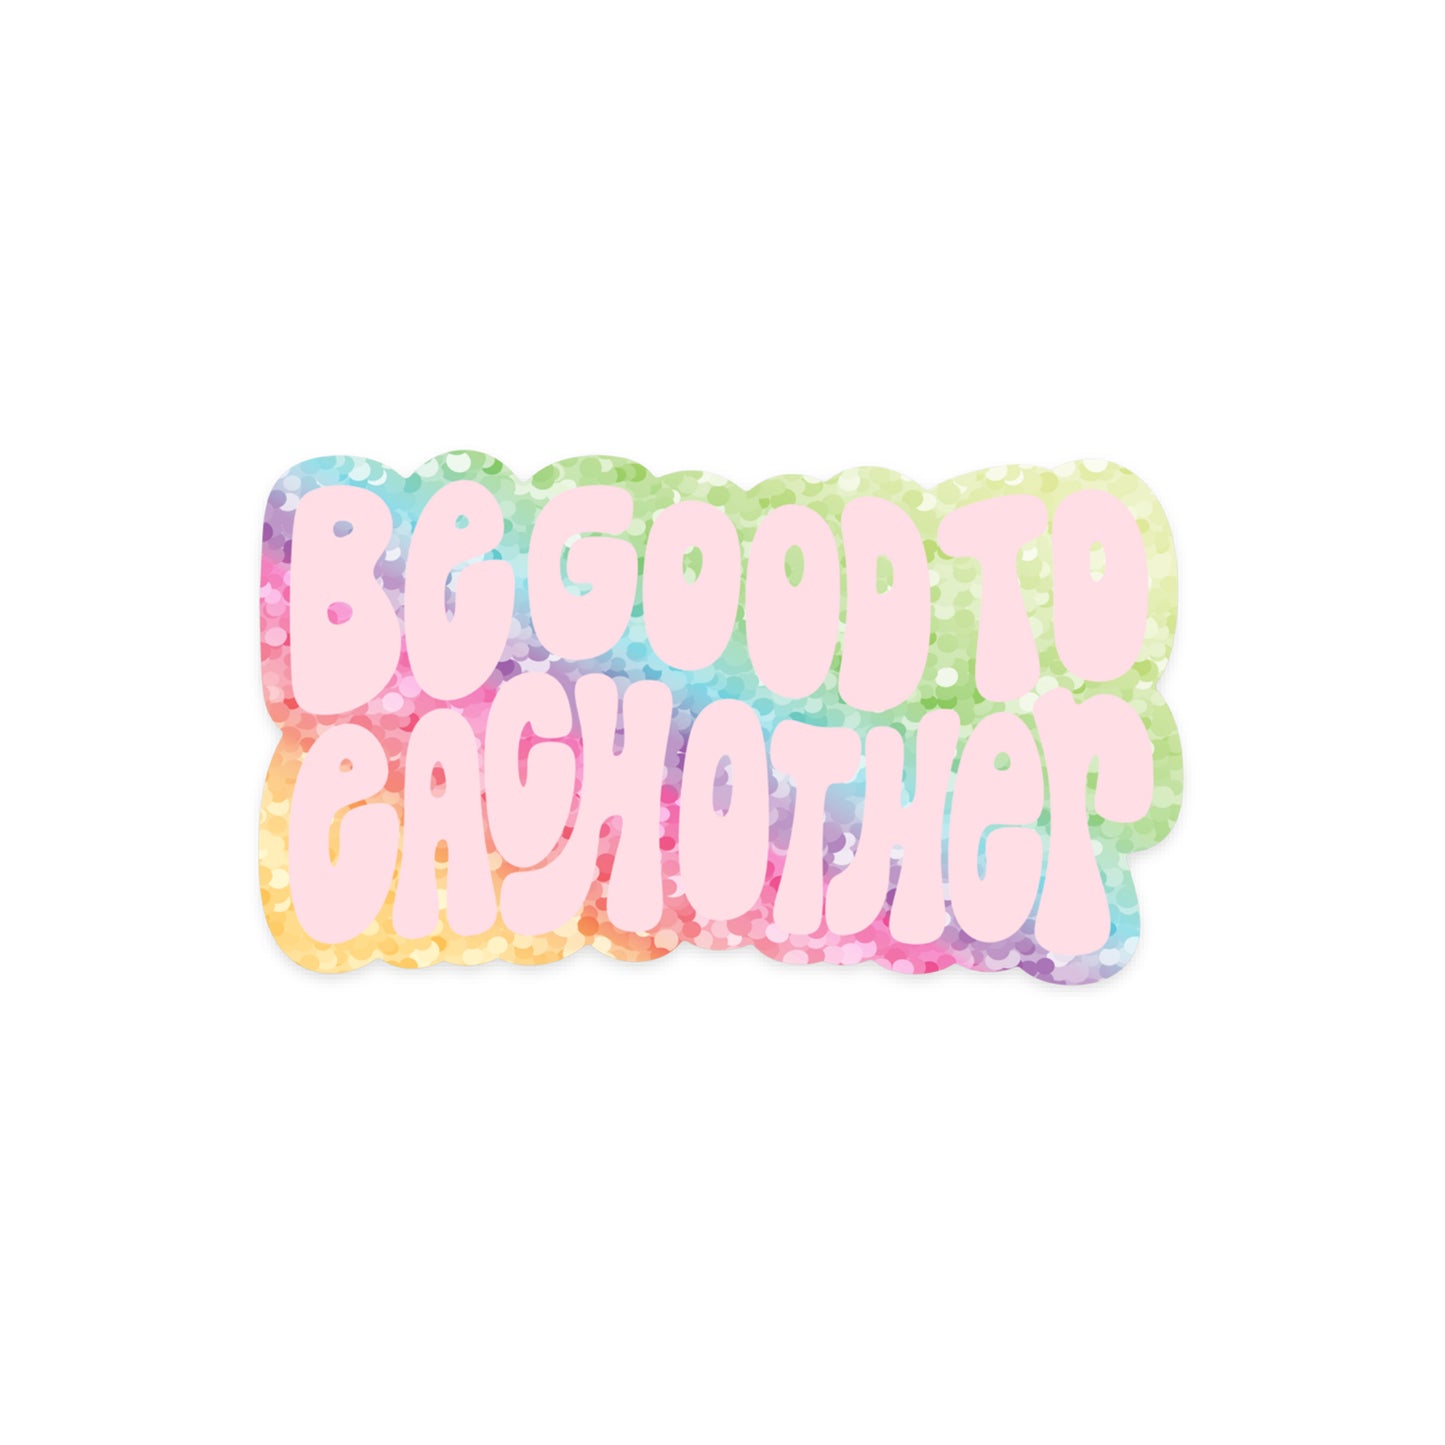 Be Good To Each Other Sticker